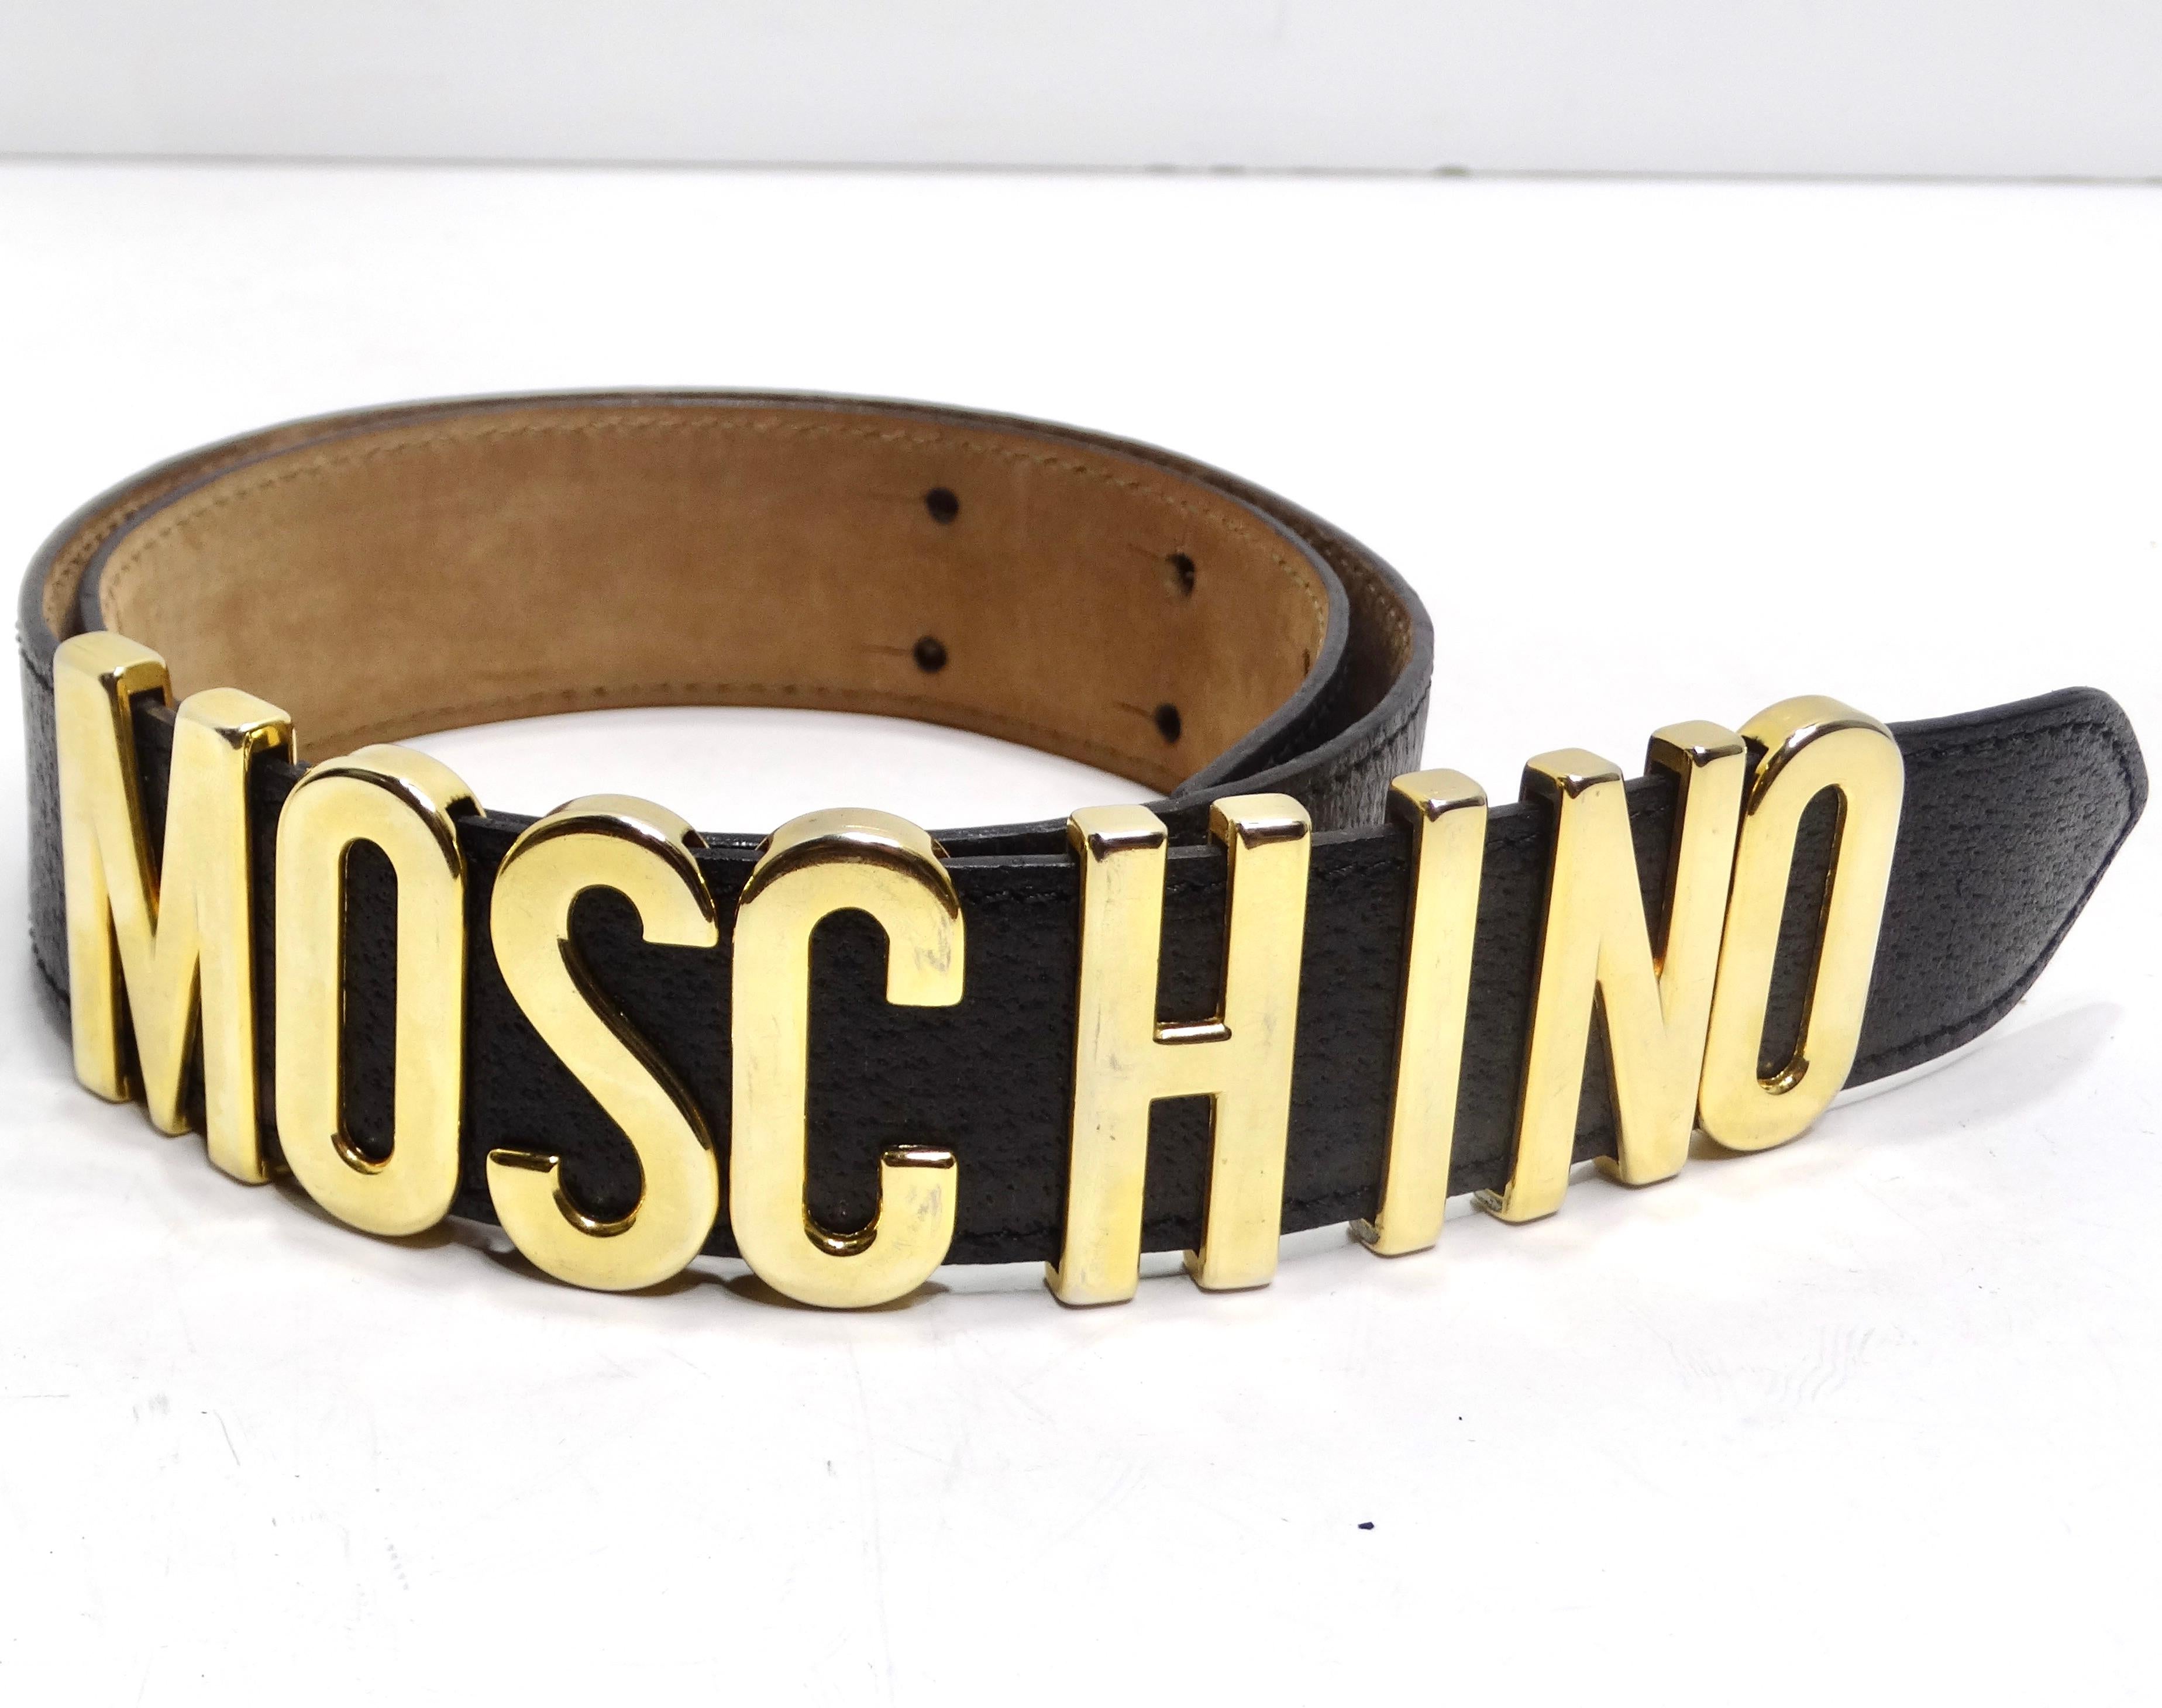 Make a bold statement with the Moschino 1990s Gold Tone Logo Black Leather Belt – a true embodiment of 90s glamour and unmistakable Moschino style. This black leather belt features a large, attention-grabbing gold-plated 'MOSCHINO' logo spanning